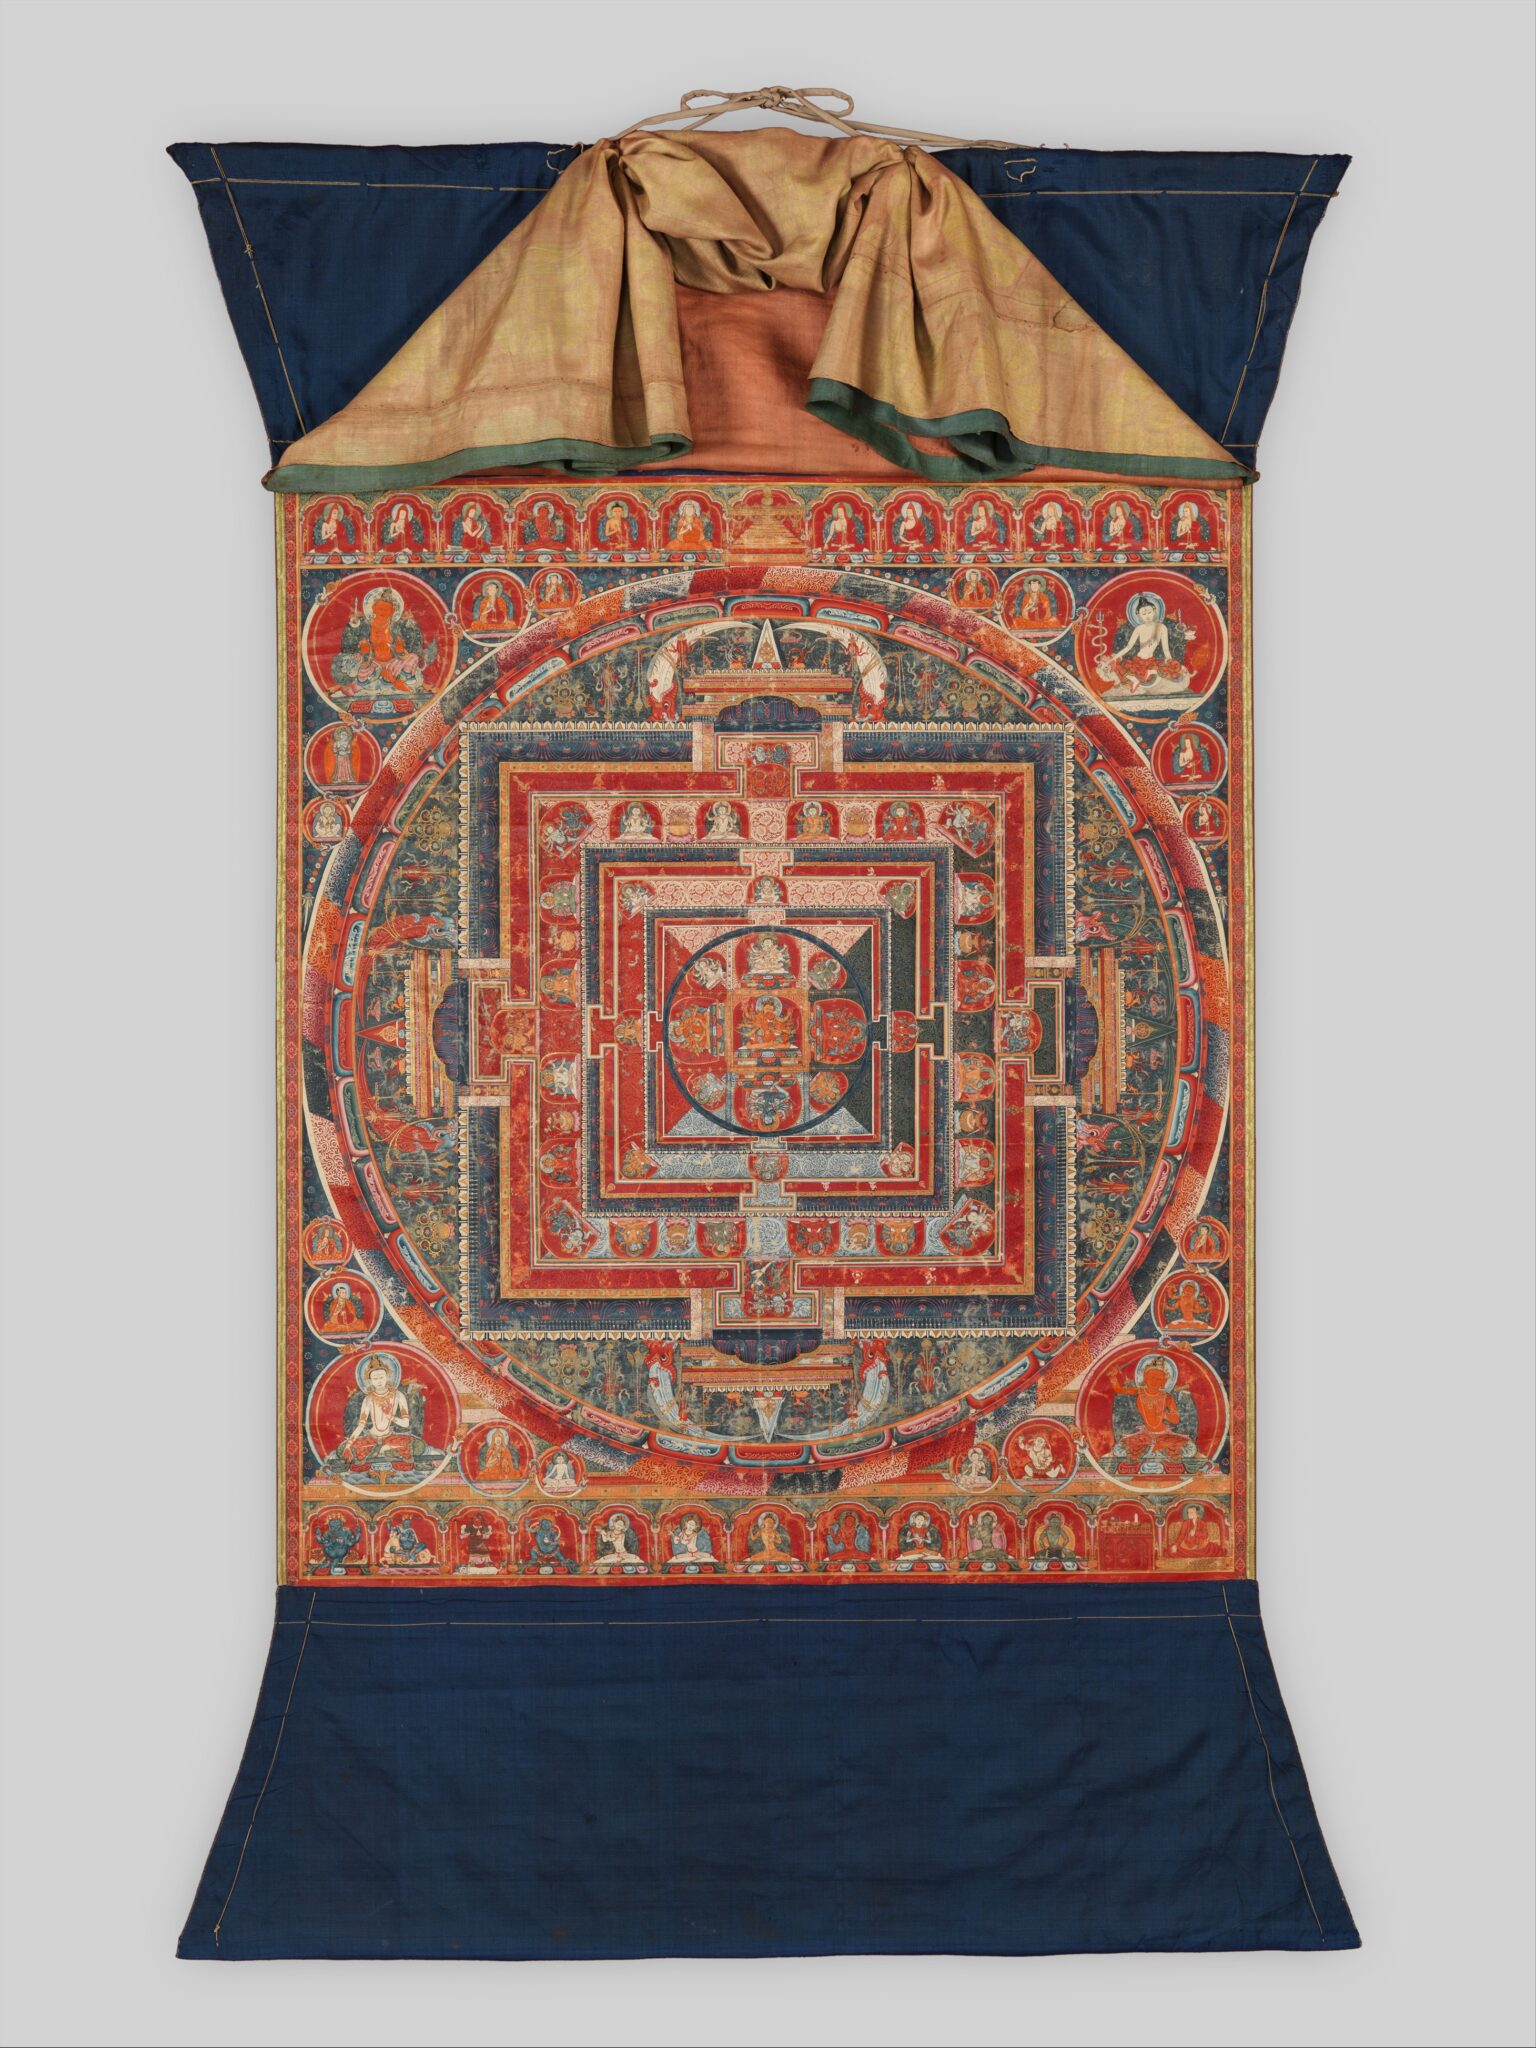 Mandala with blue textile border at top and bottom; panel of yellow textile raised to reveal painting.